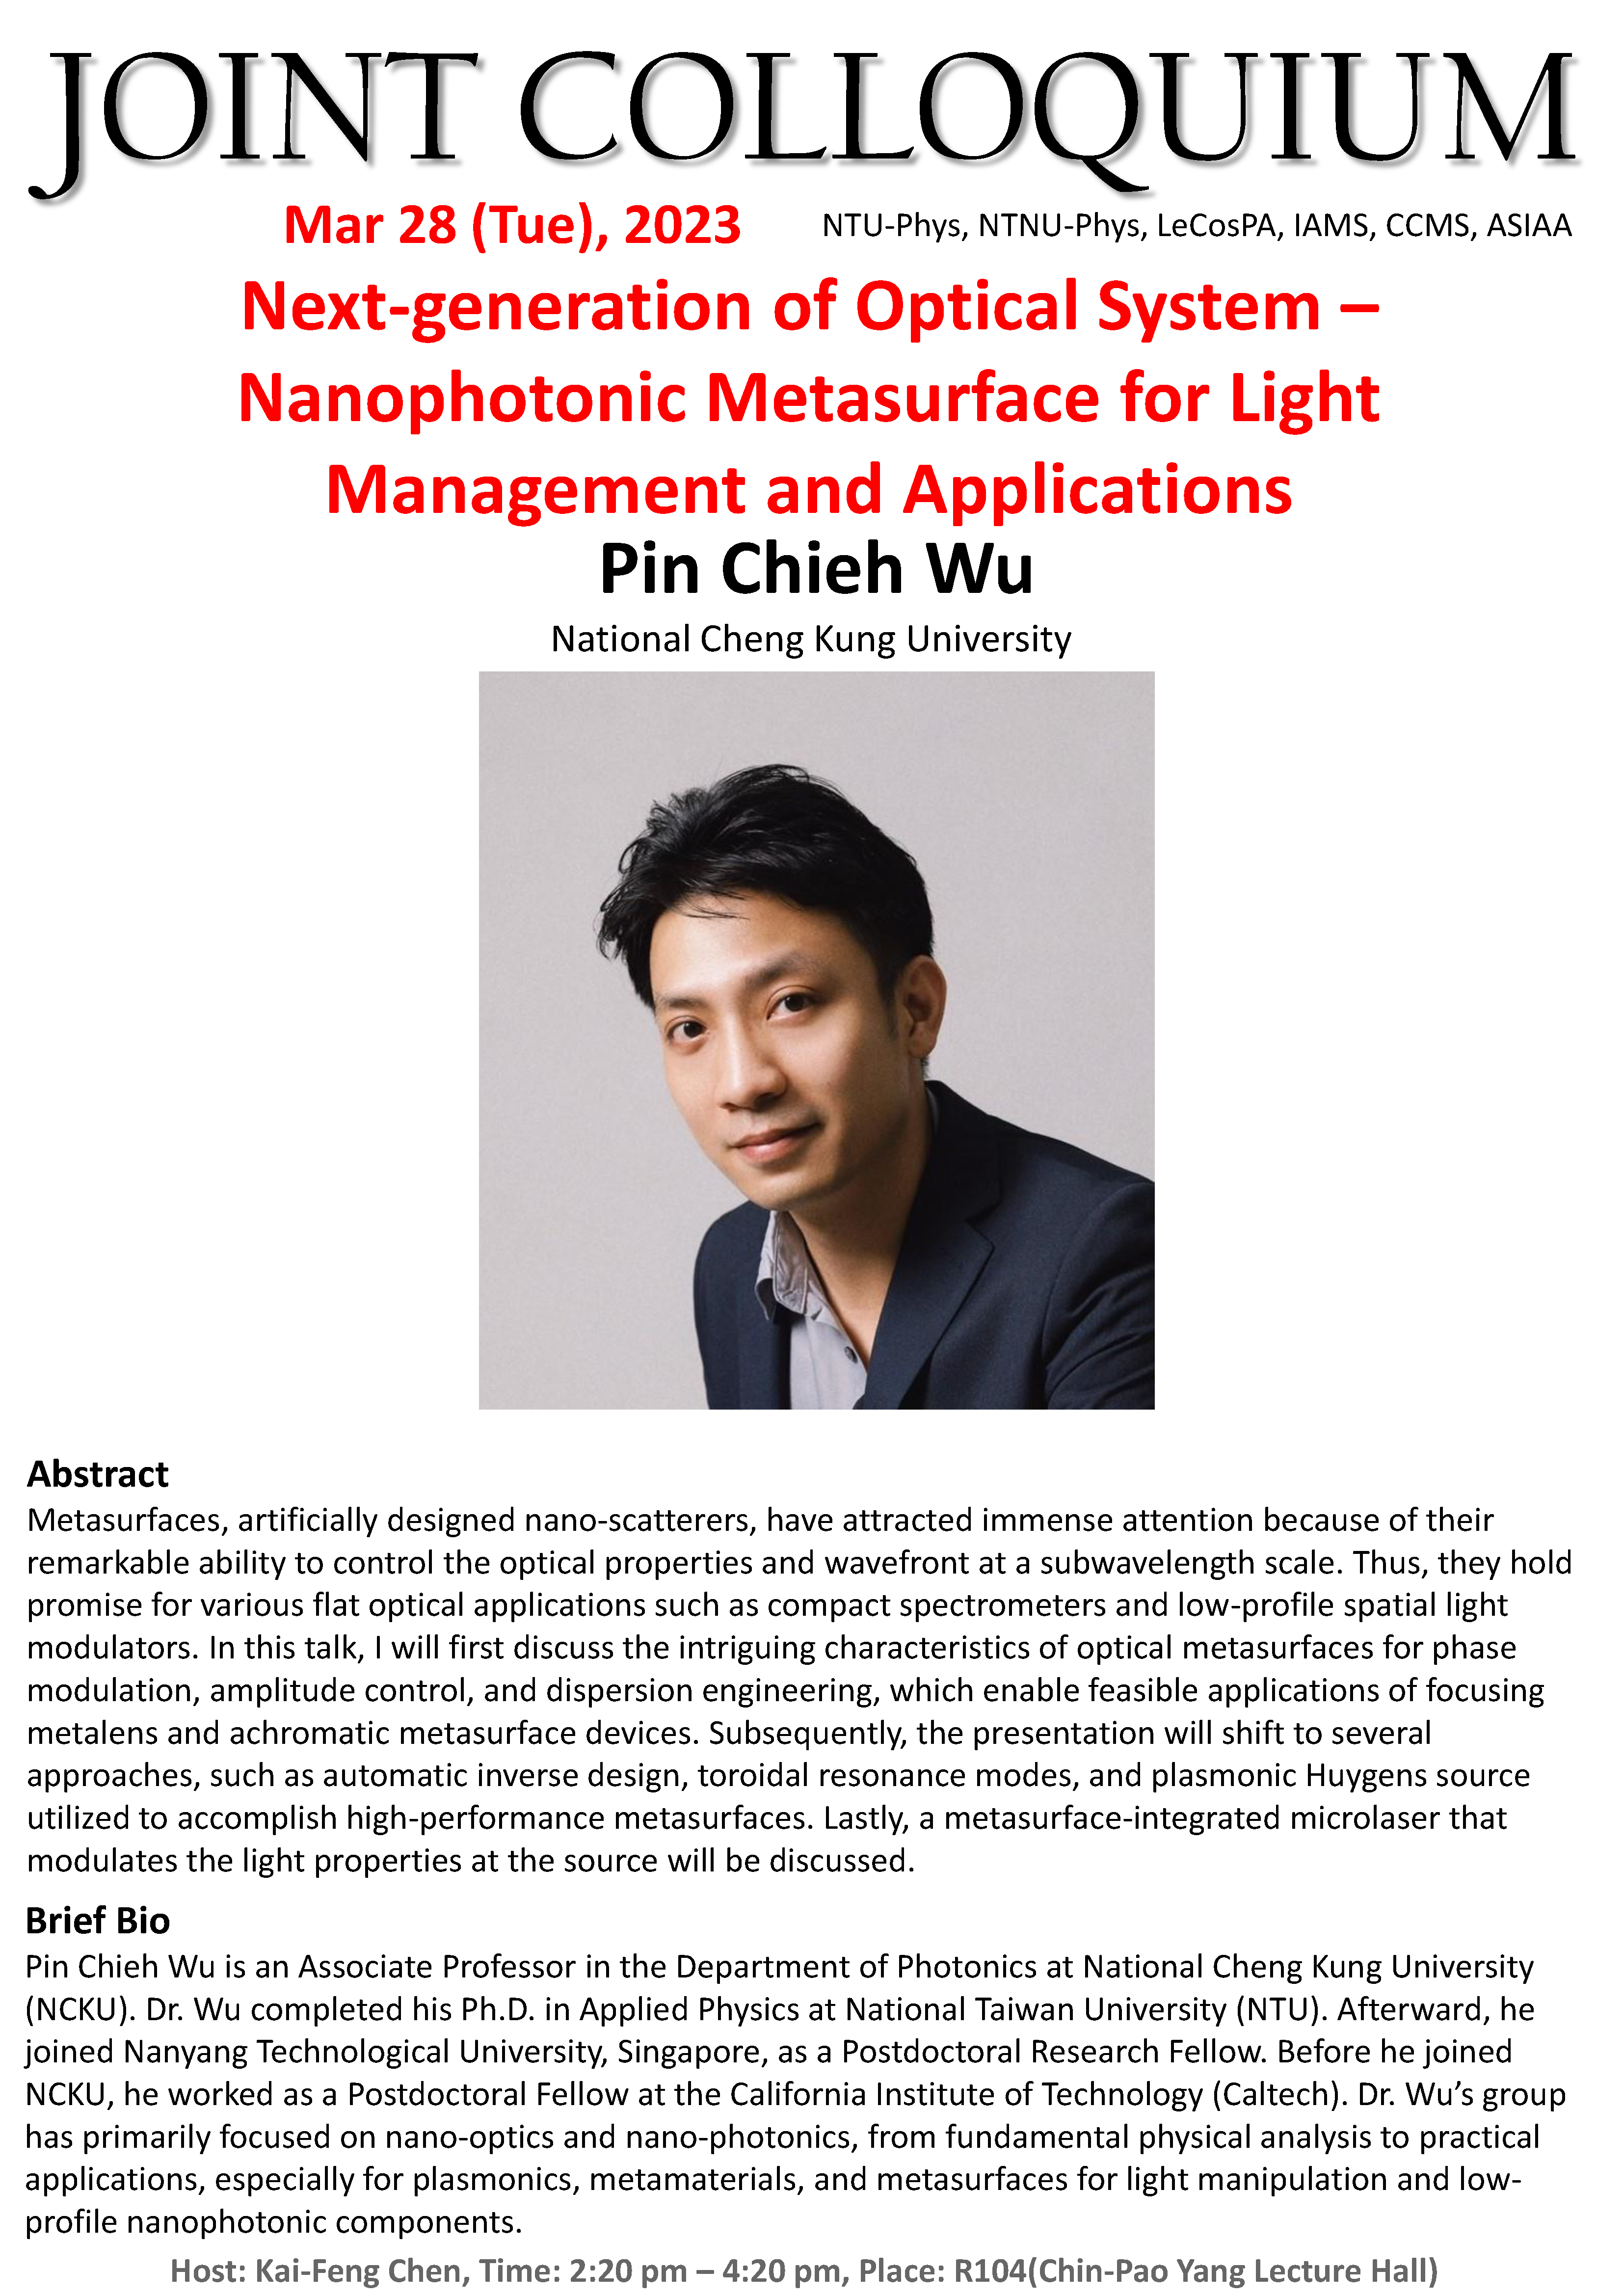 Next-generation of Optical System – Nanophotonic Metasurface for Light Management and Applications